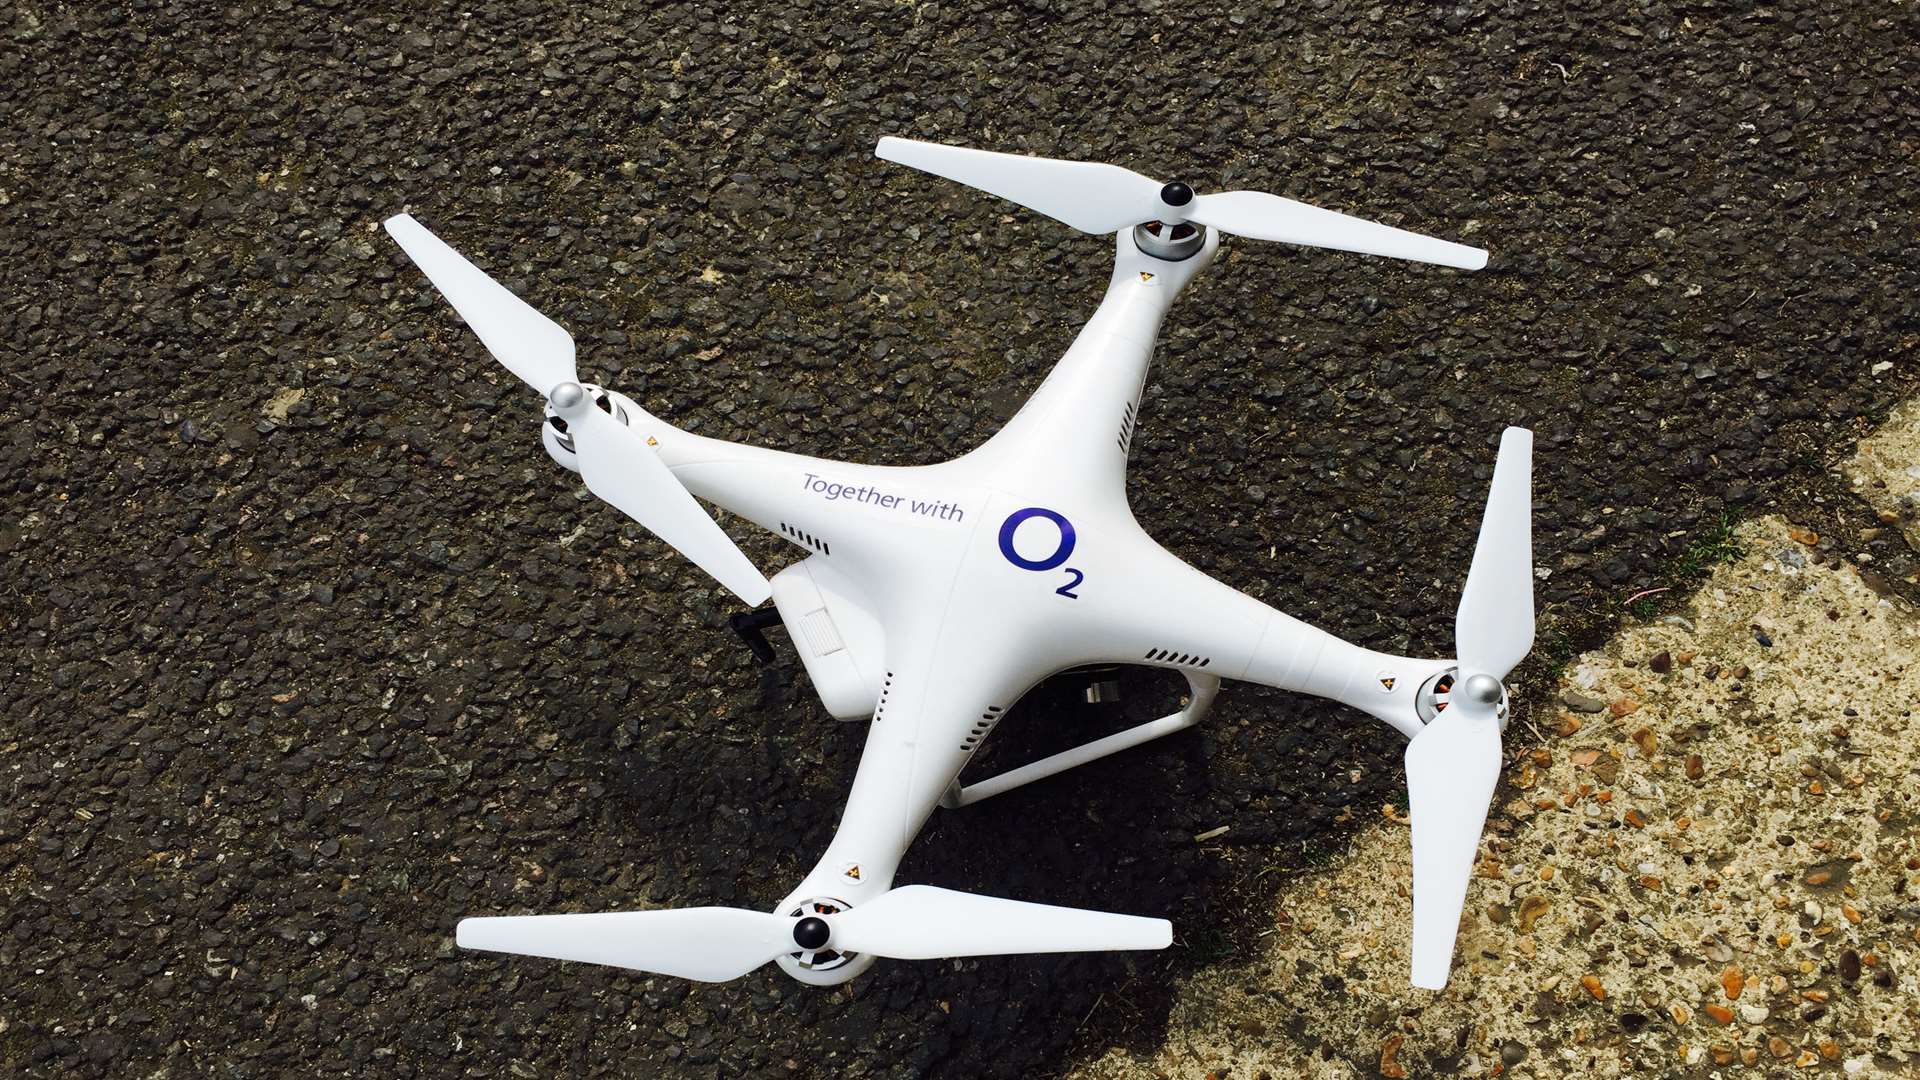 The drone donated to NSARDA by O2